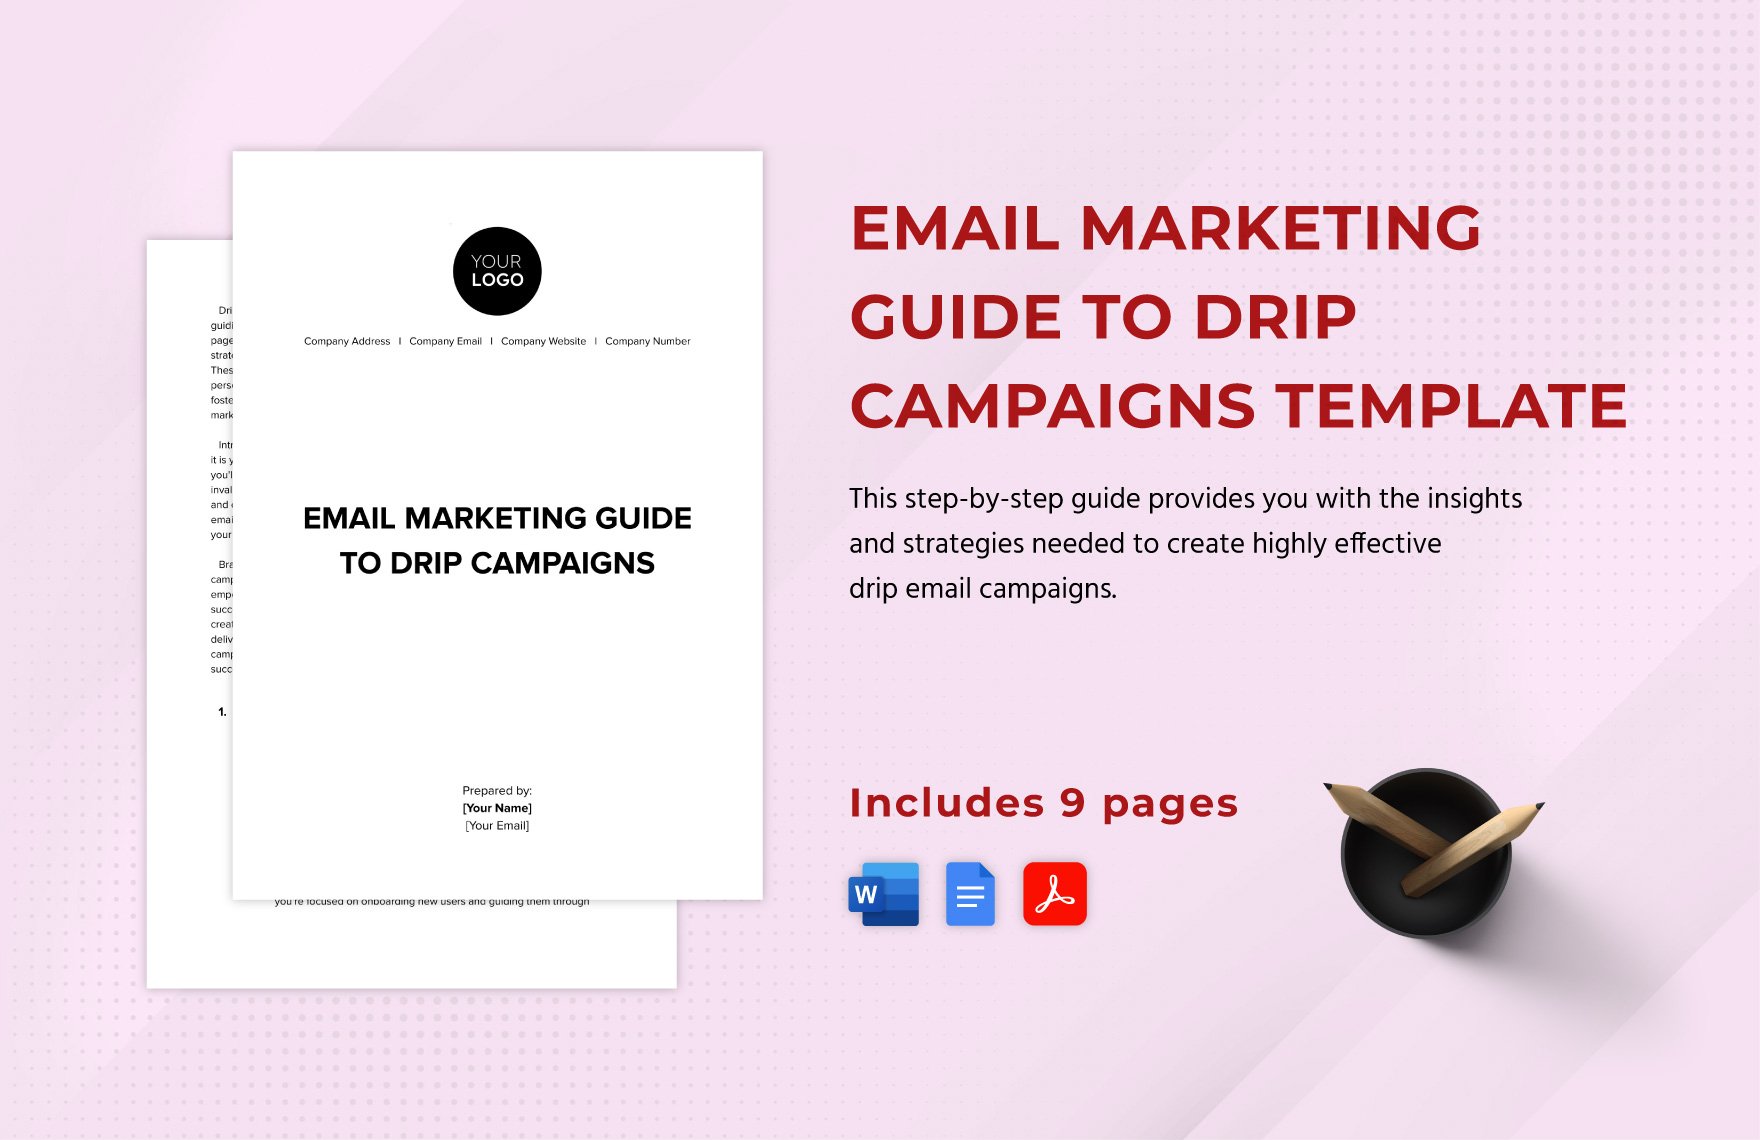 Email Marketing Guide to Drip Campaigns Template